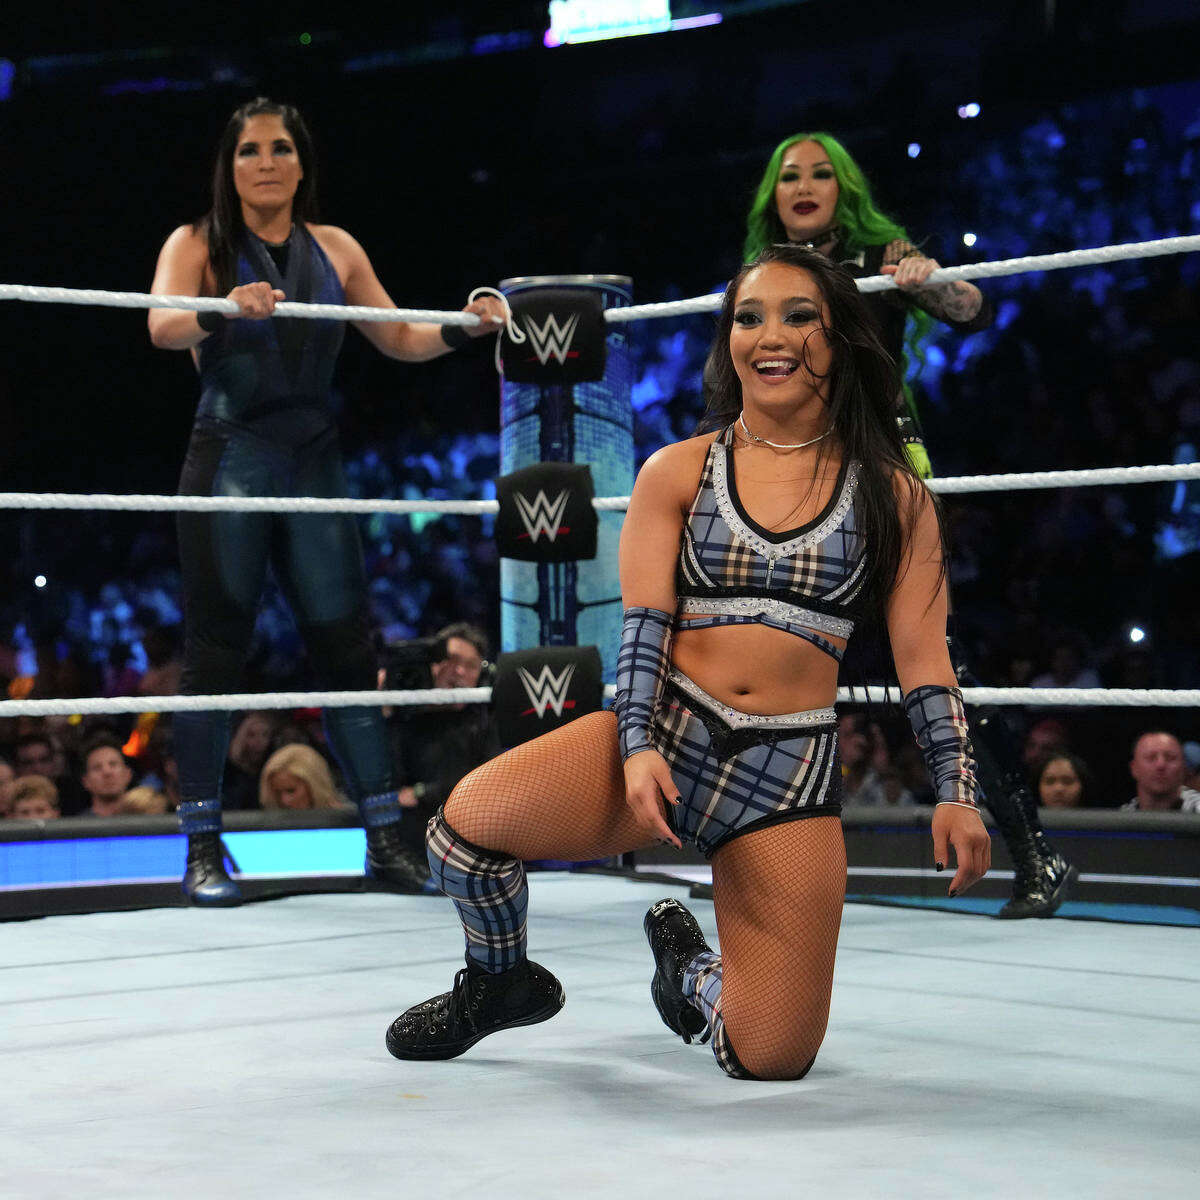 Laredoan Roxanne Perez makes her in-ring network TV WWE debut on Smackdown in a match with partners Shotzi Blackheart and Raquel Rodriguez against Damage CNTRL's Bayley, Dakota Kai and IYO SKY on Friday, Oct. 14, 2022.